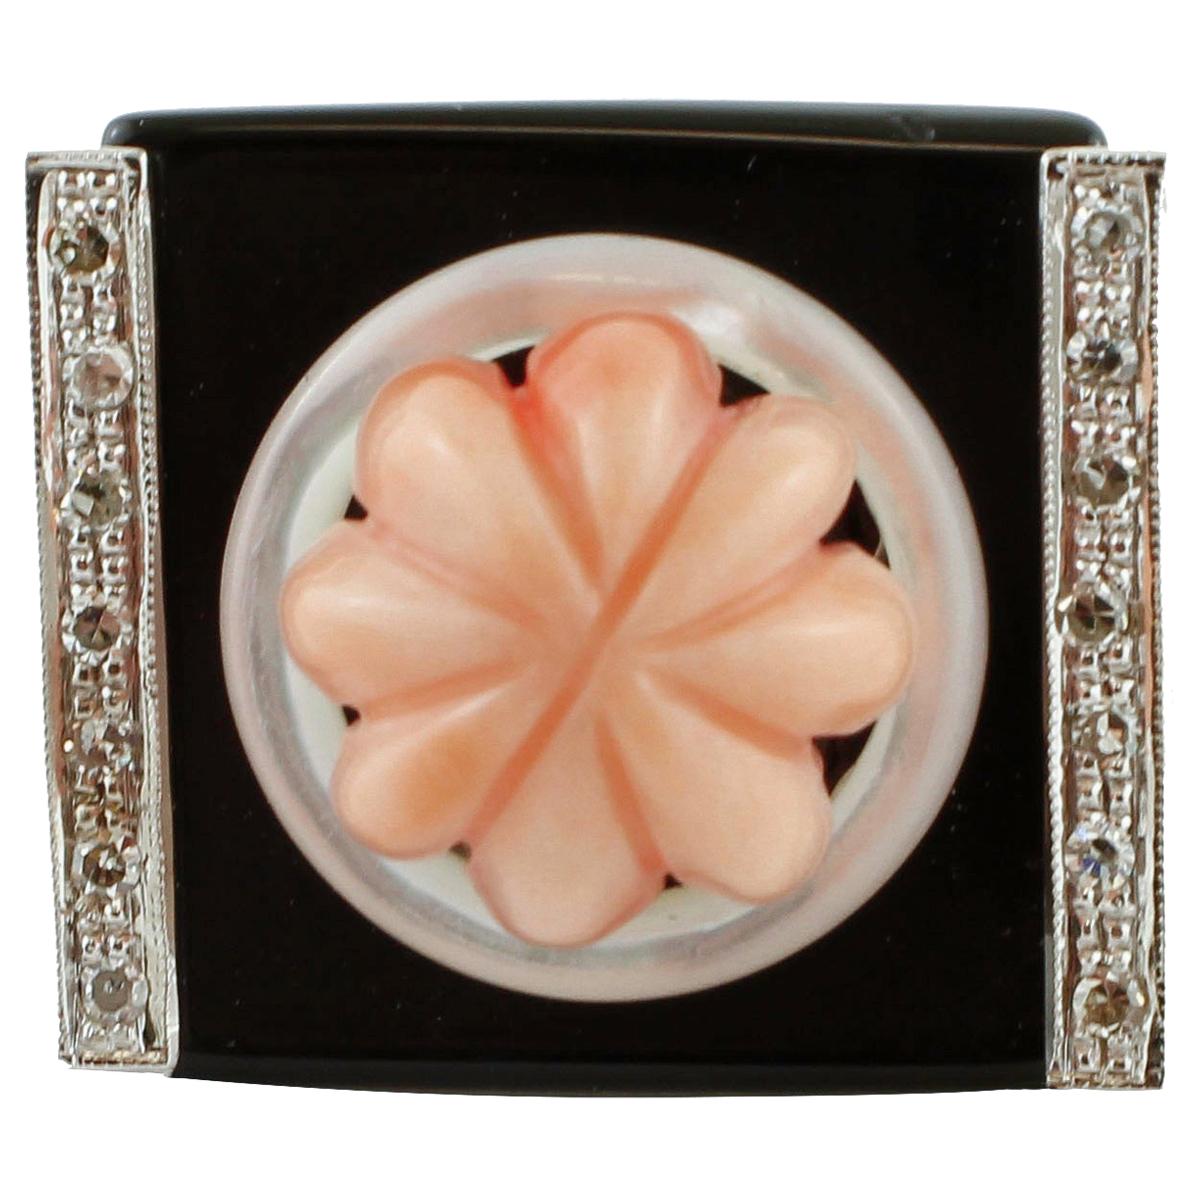 Diamonds, Onyx, White Stone, Carved Coral, Rose Gold Fashion Ring